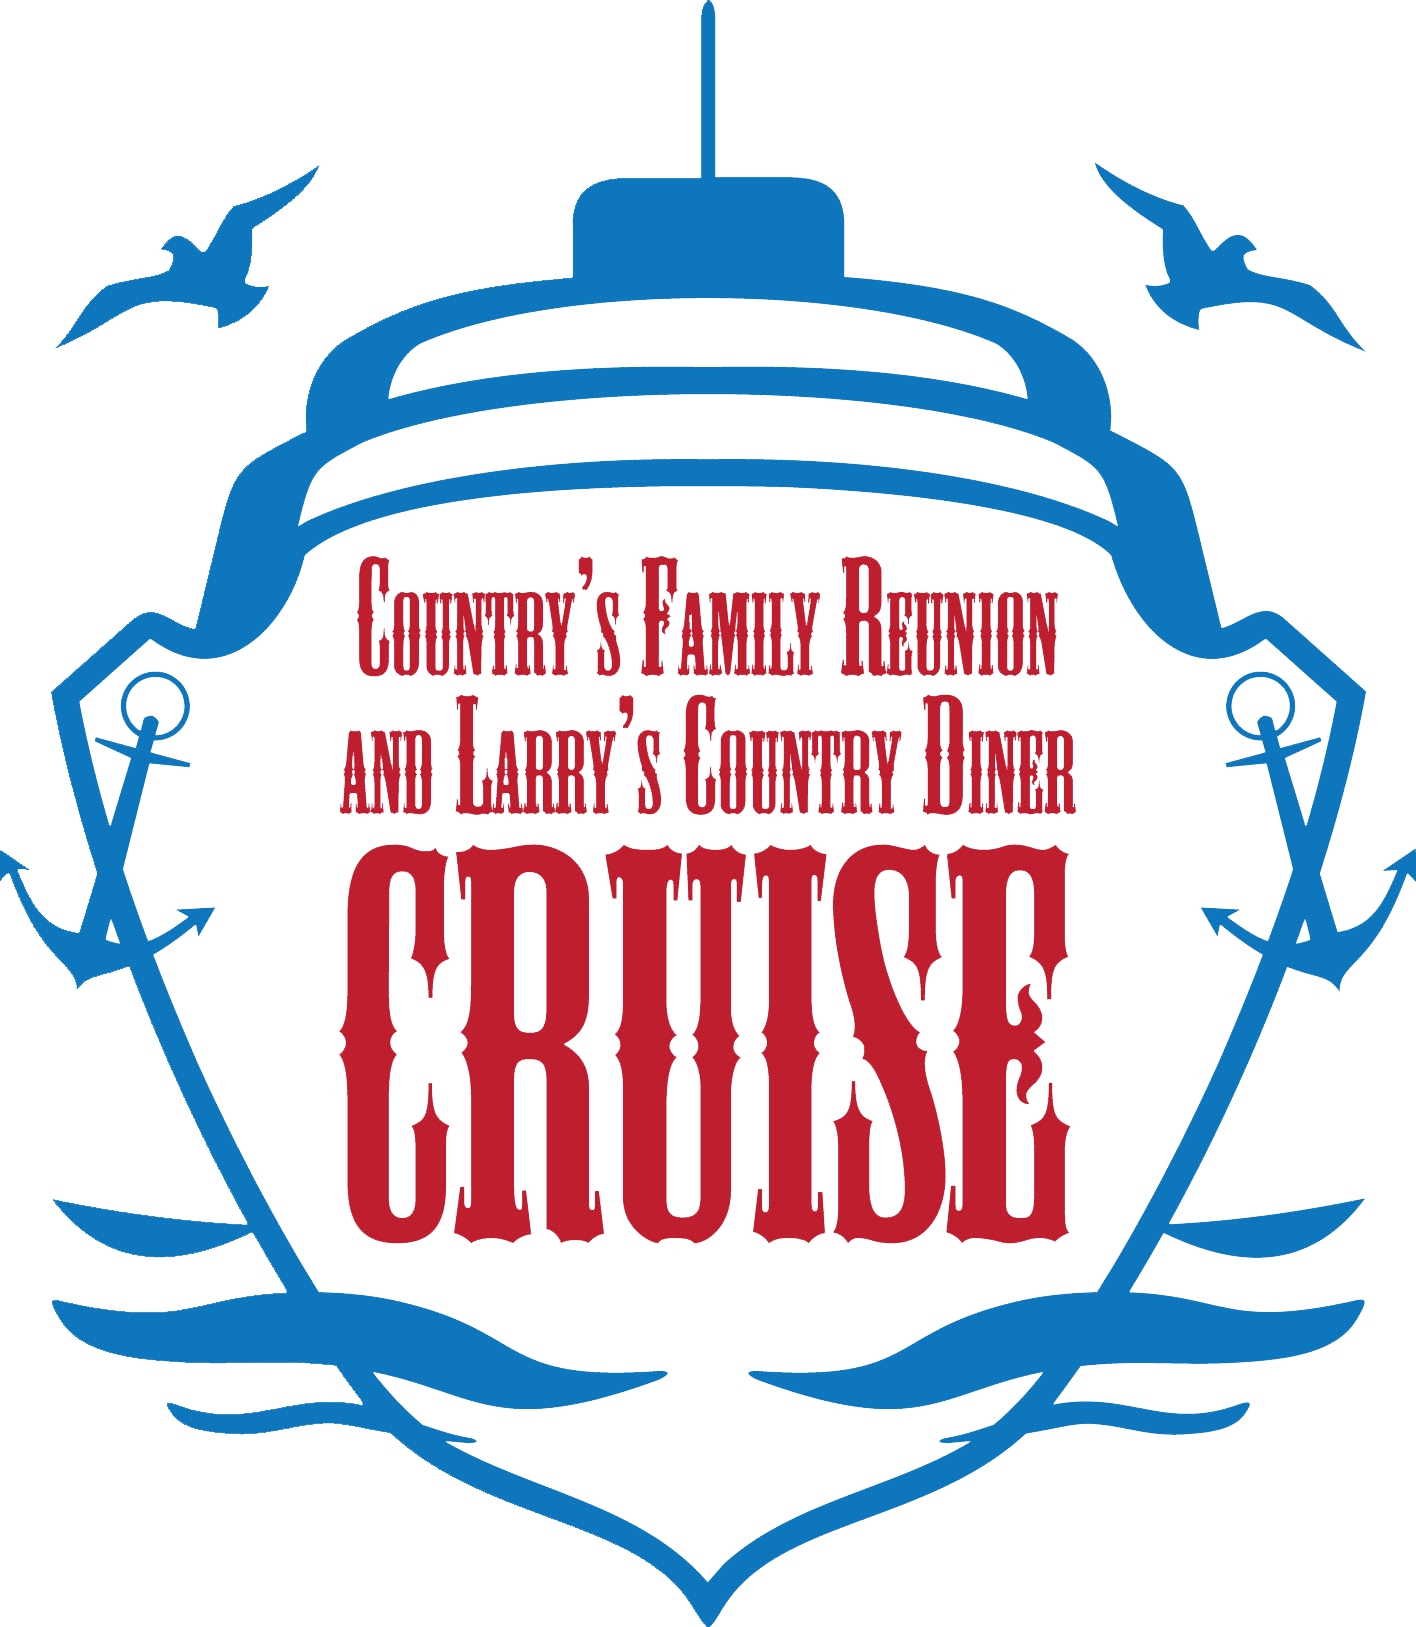 CFR Cruise 2019 Prices